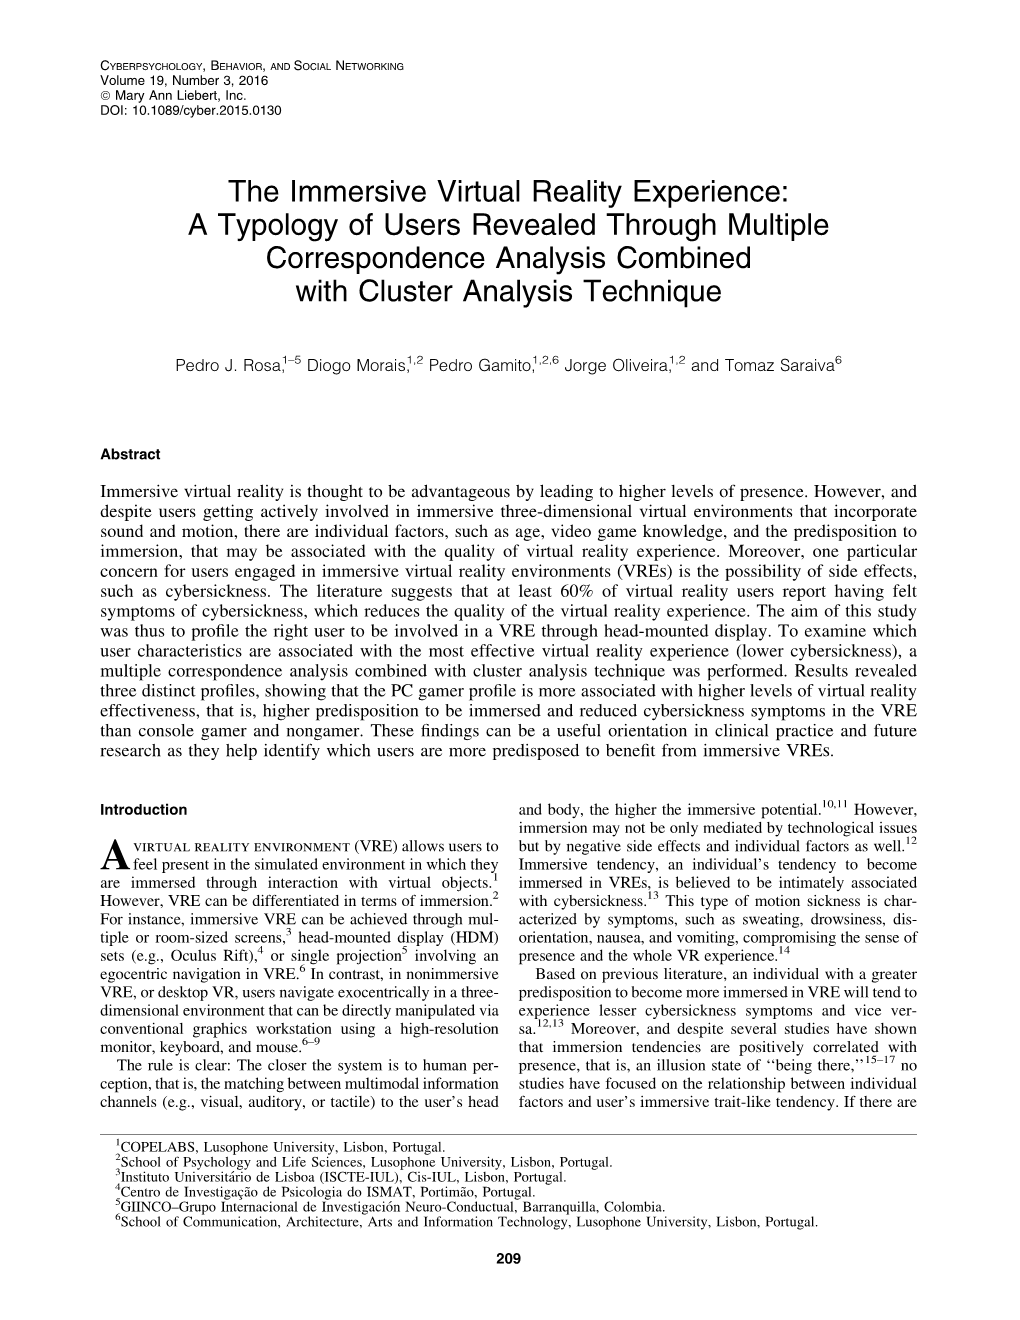 The Immersive Virtual Reality Experience: a Typology of Users Revealed Through Multiple Correspondence Analysis Combined with Cluster Analysis Technique